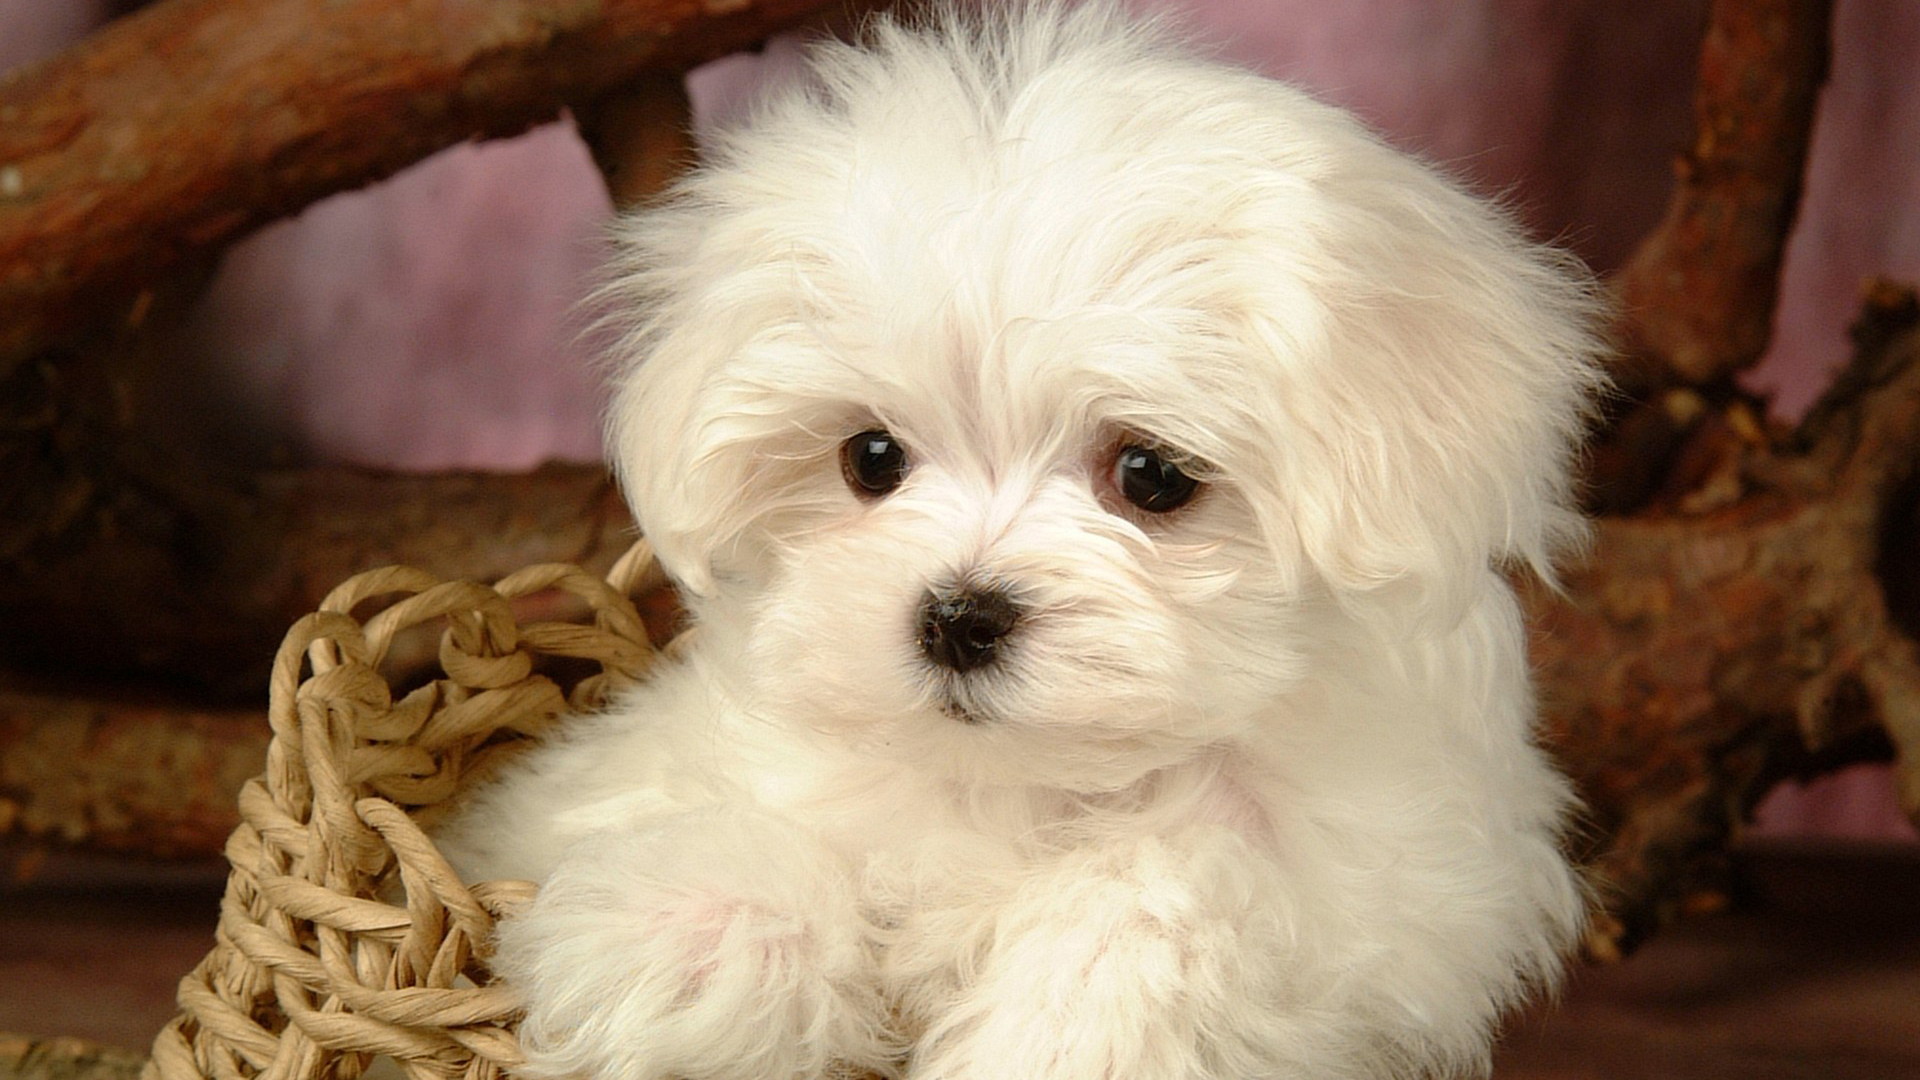 Puppies hd Wallpapers 1080p images